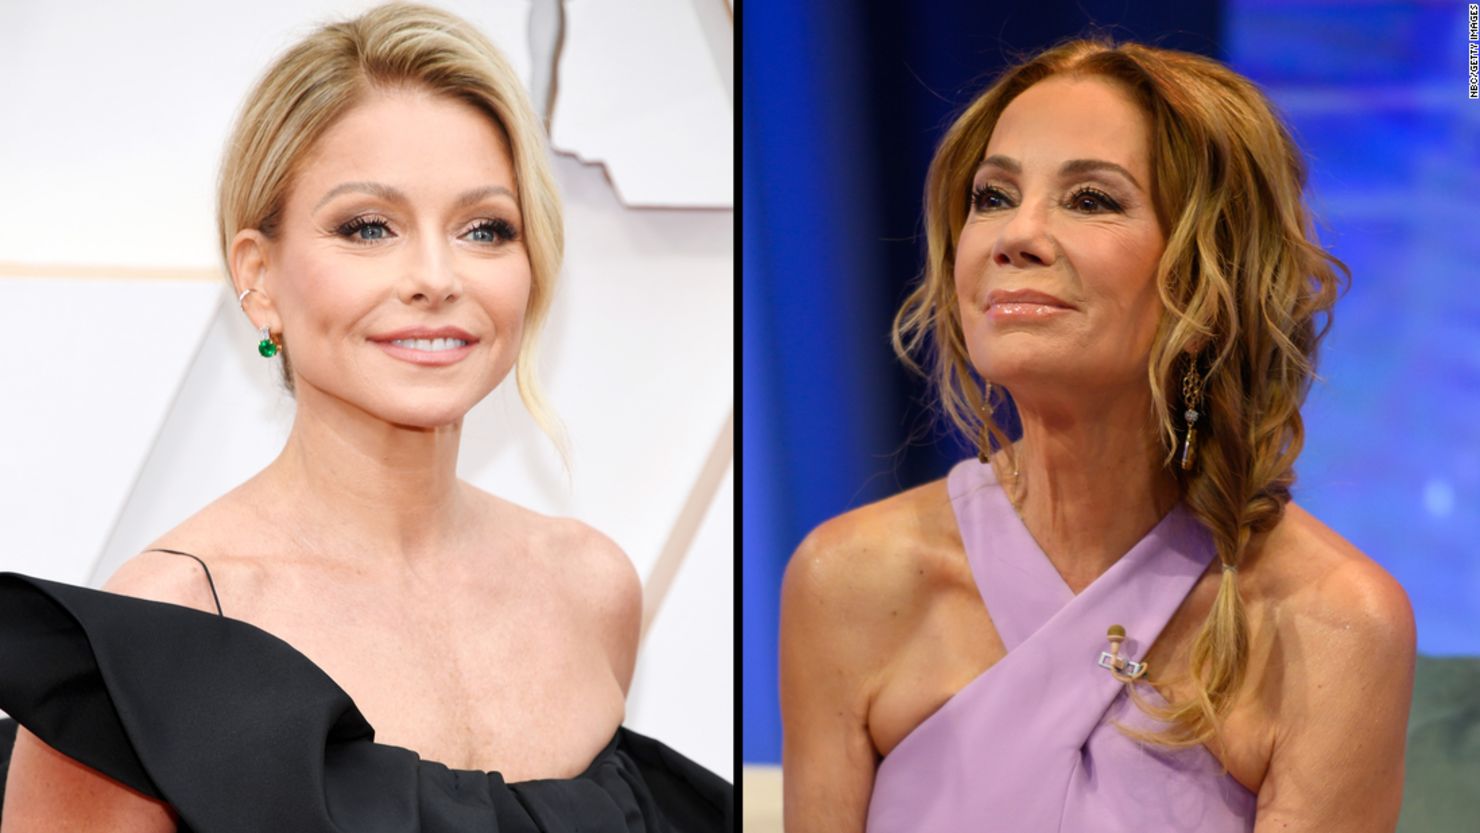 Kelly Ripa thanks Kathie Lee Gifford for not reading her book